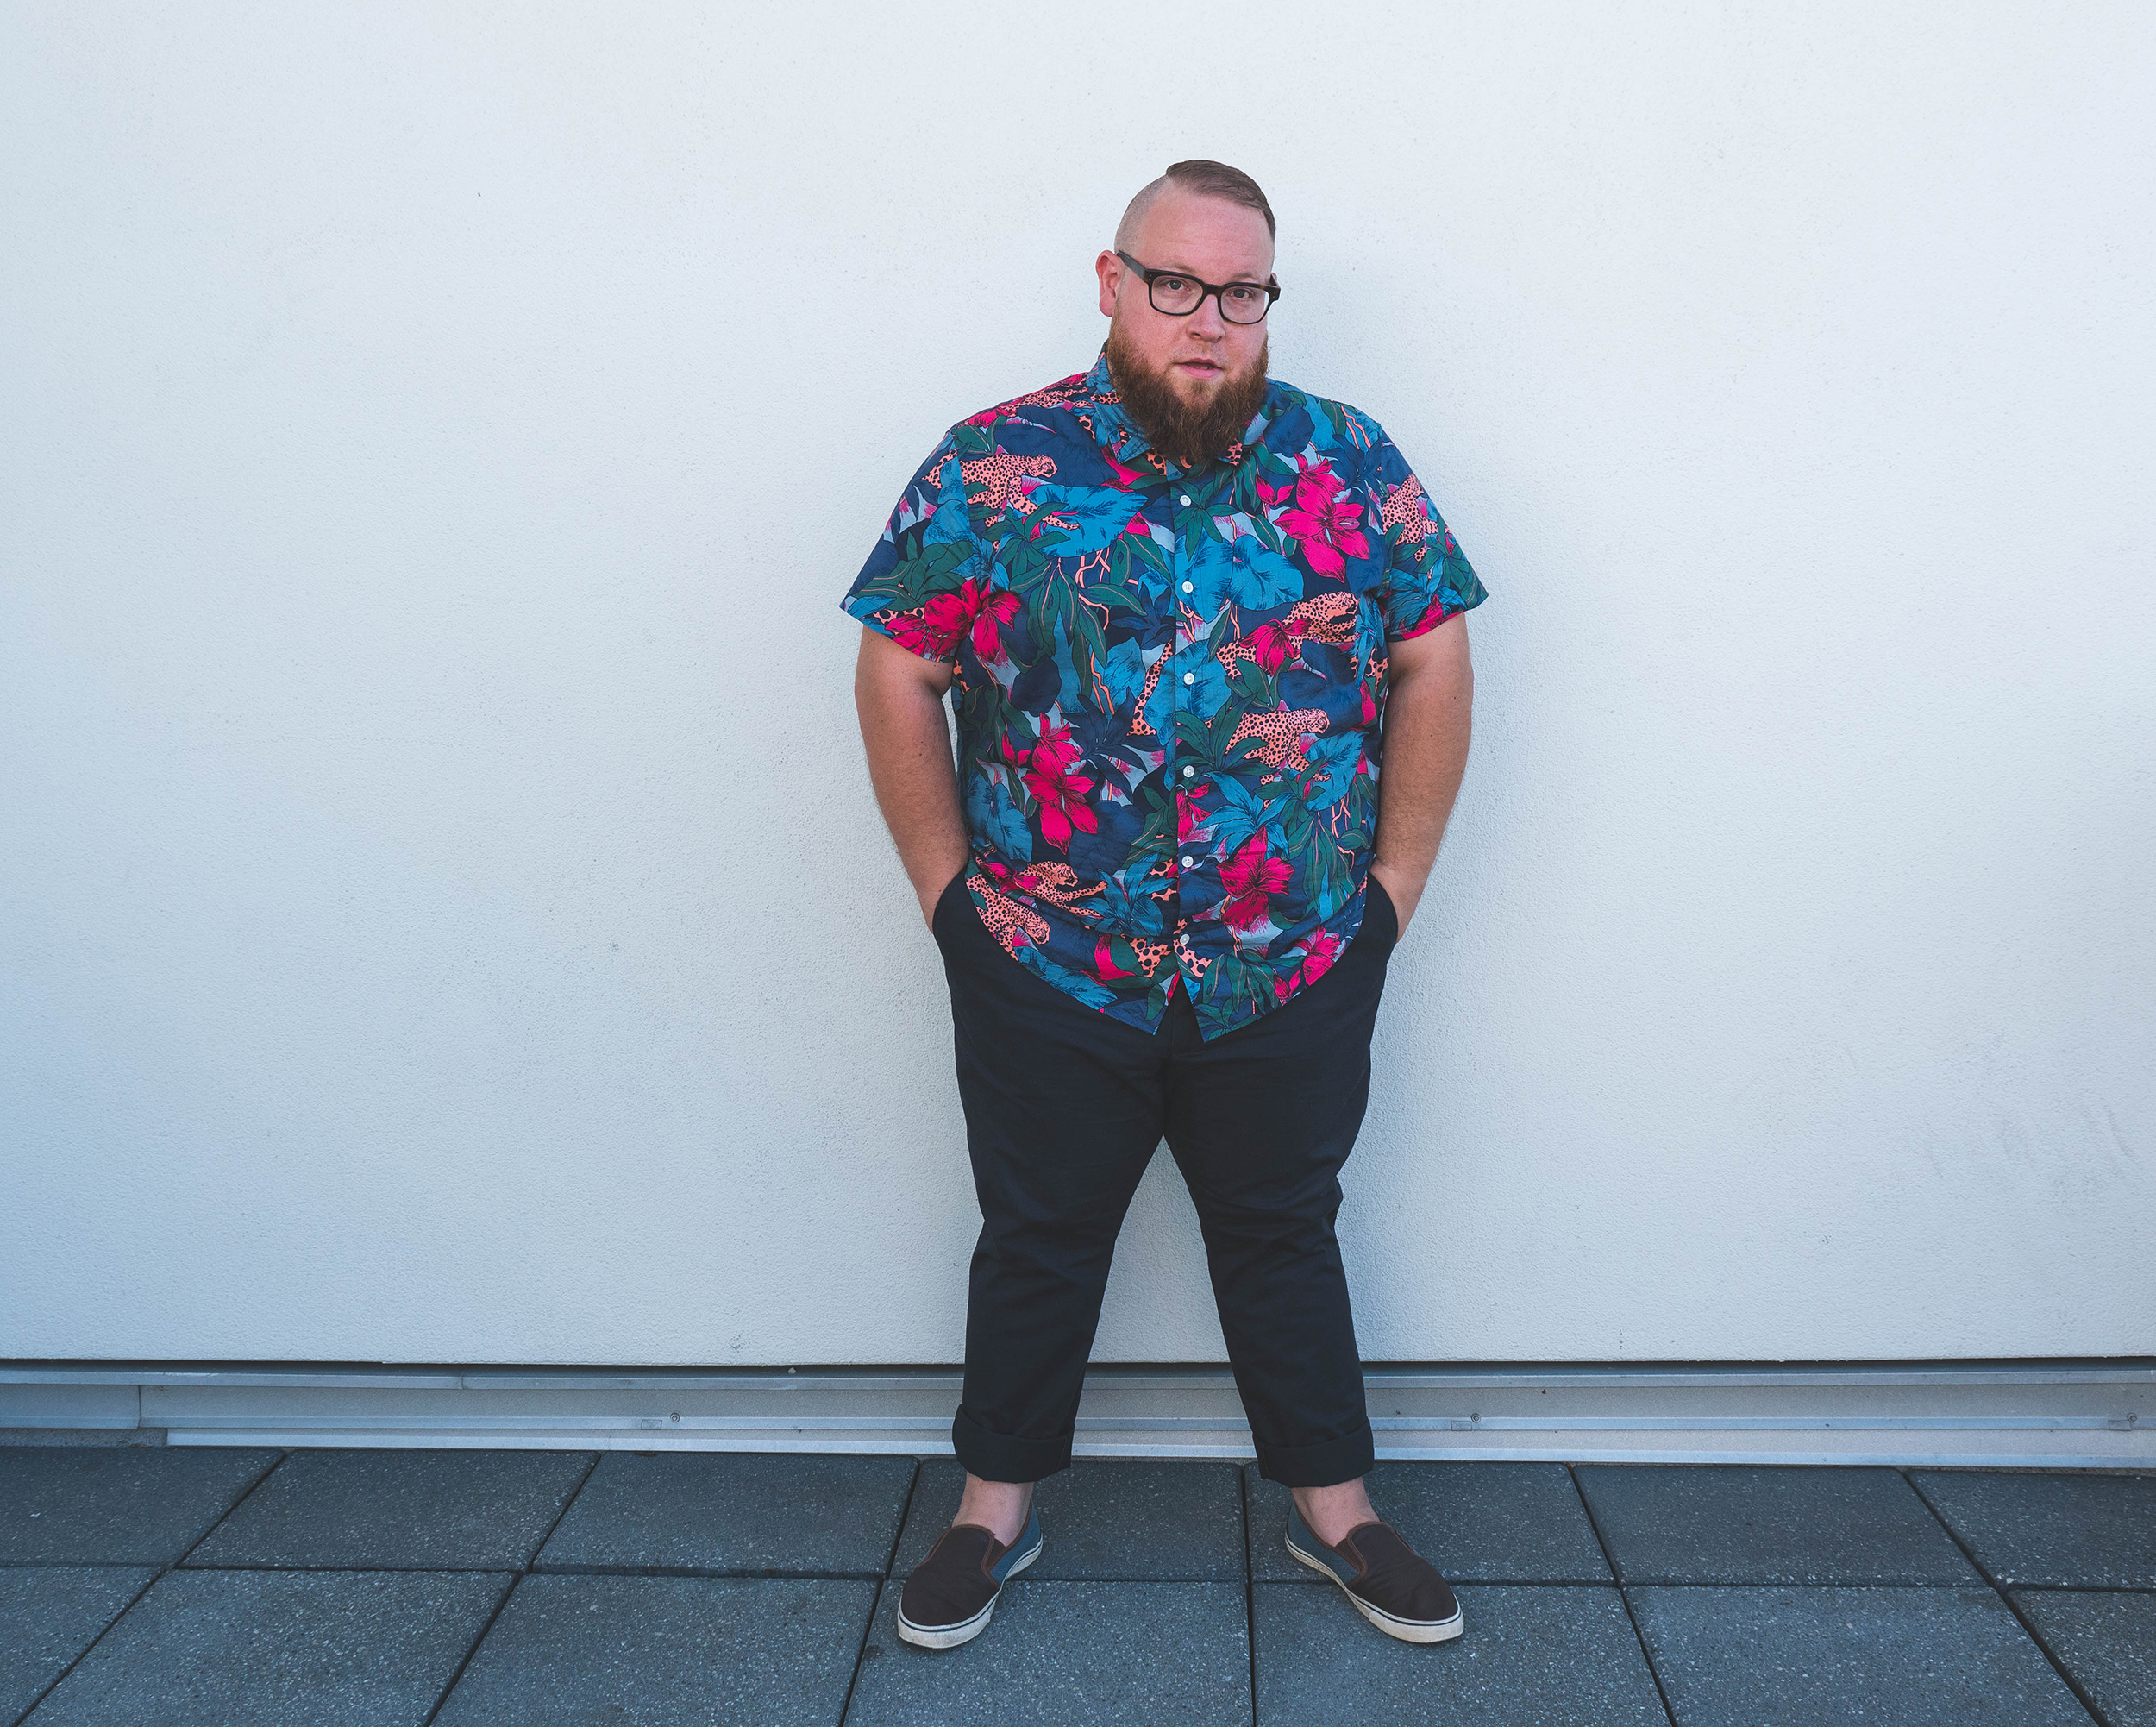 Bonobos Extended Sizes launches